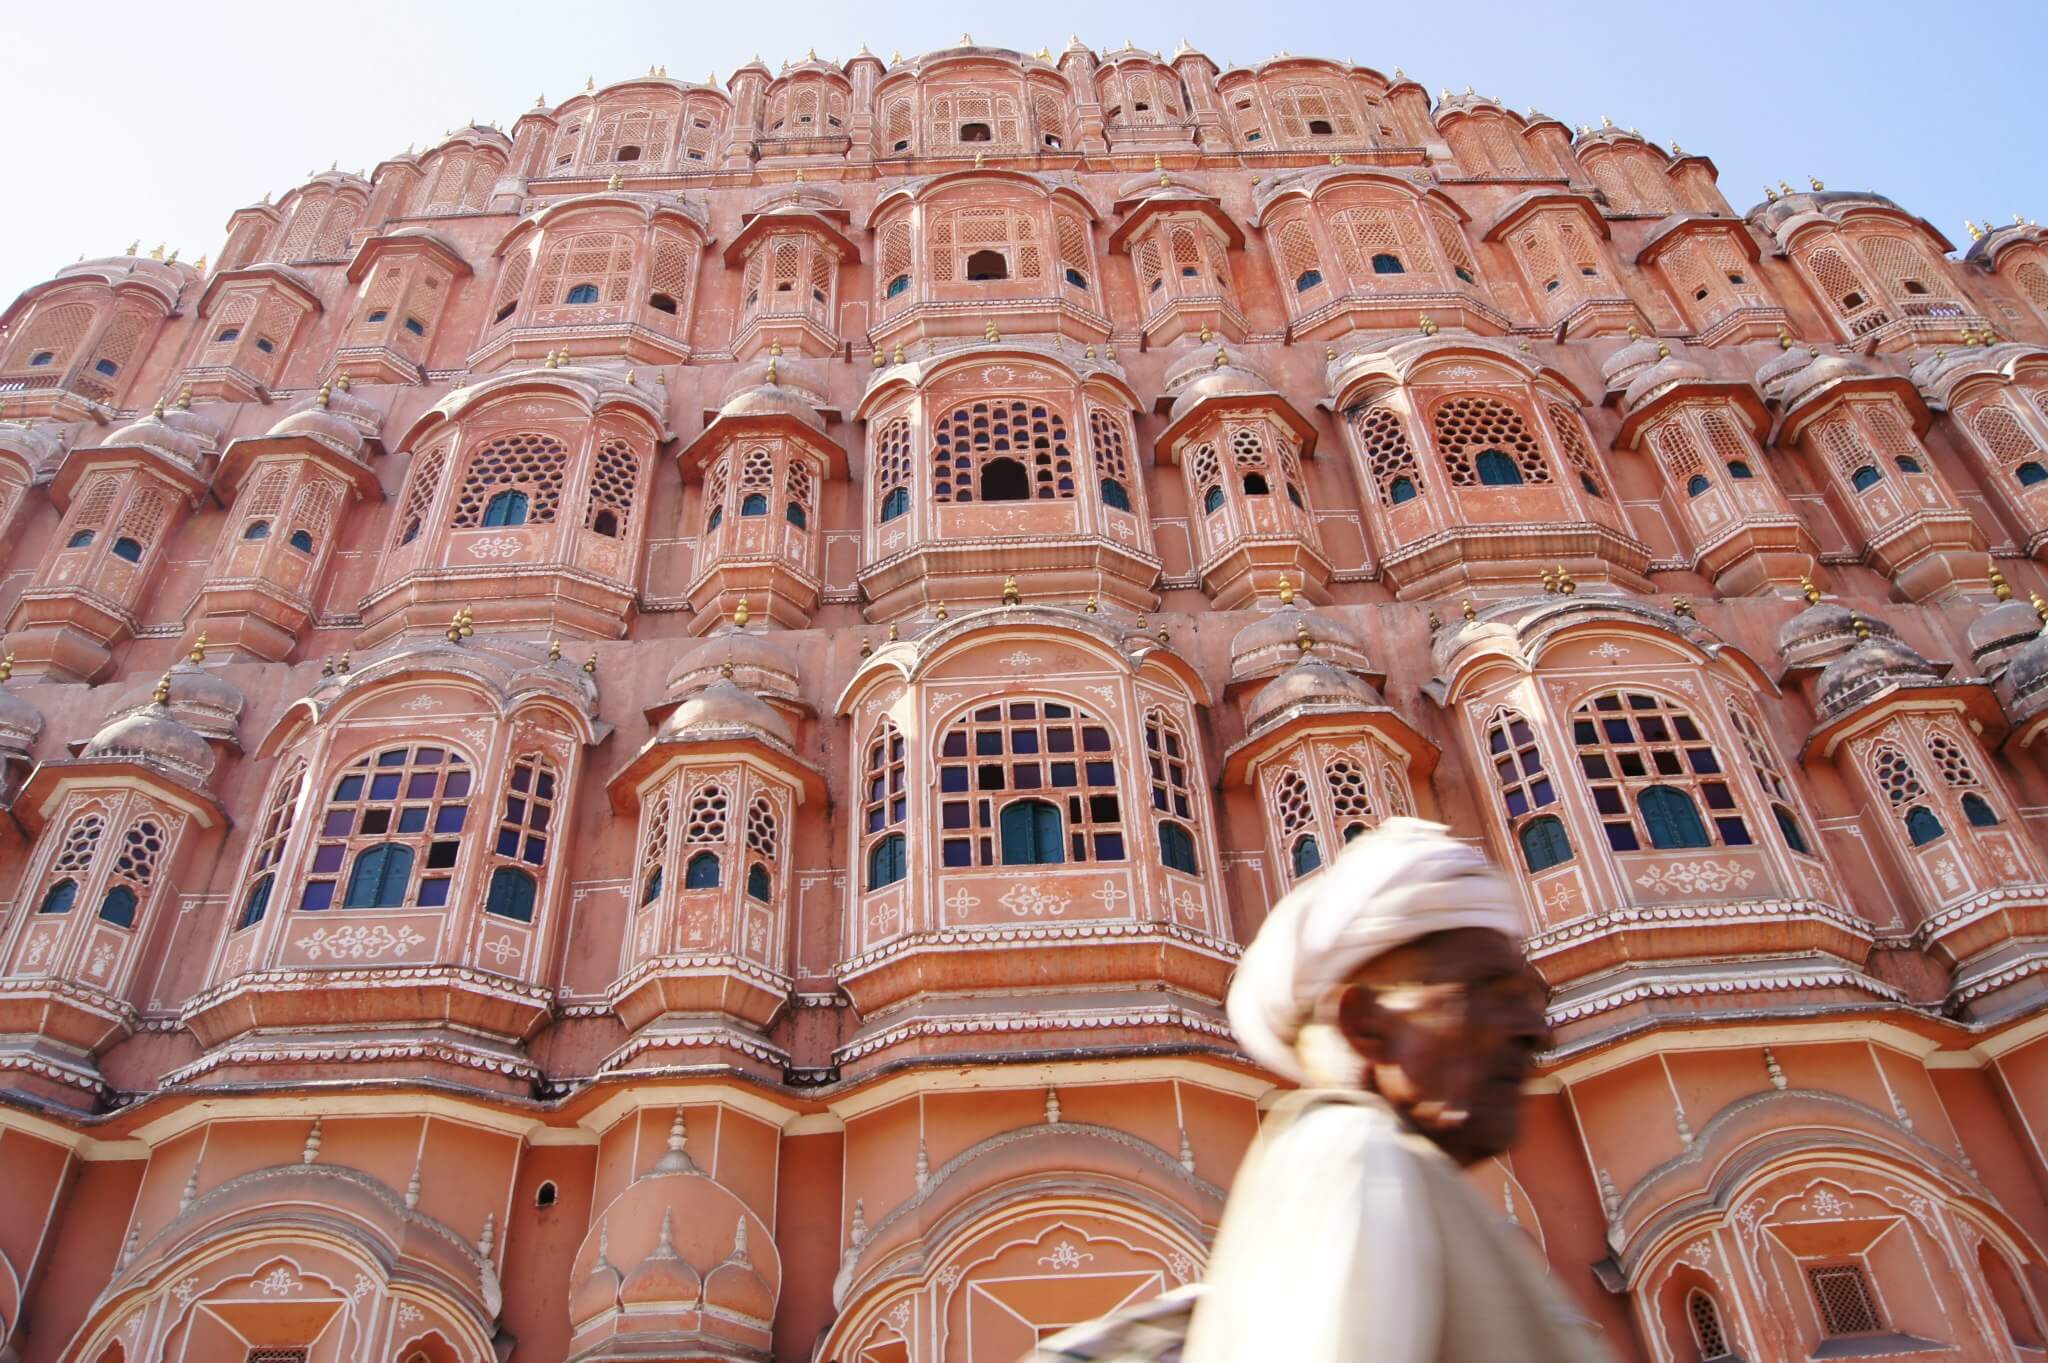 The BEST places to visit in Jaipur for kids